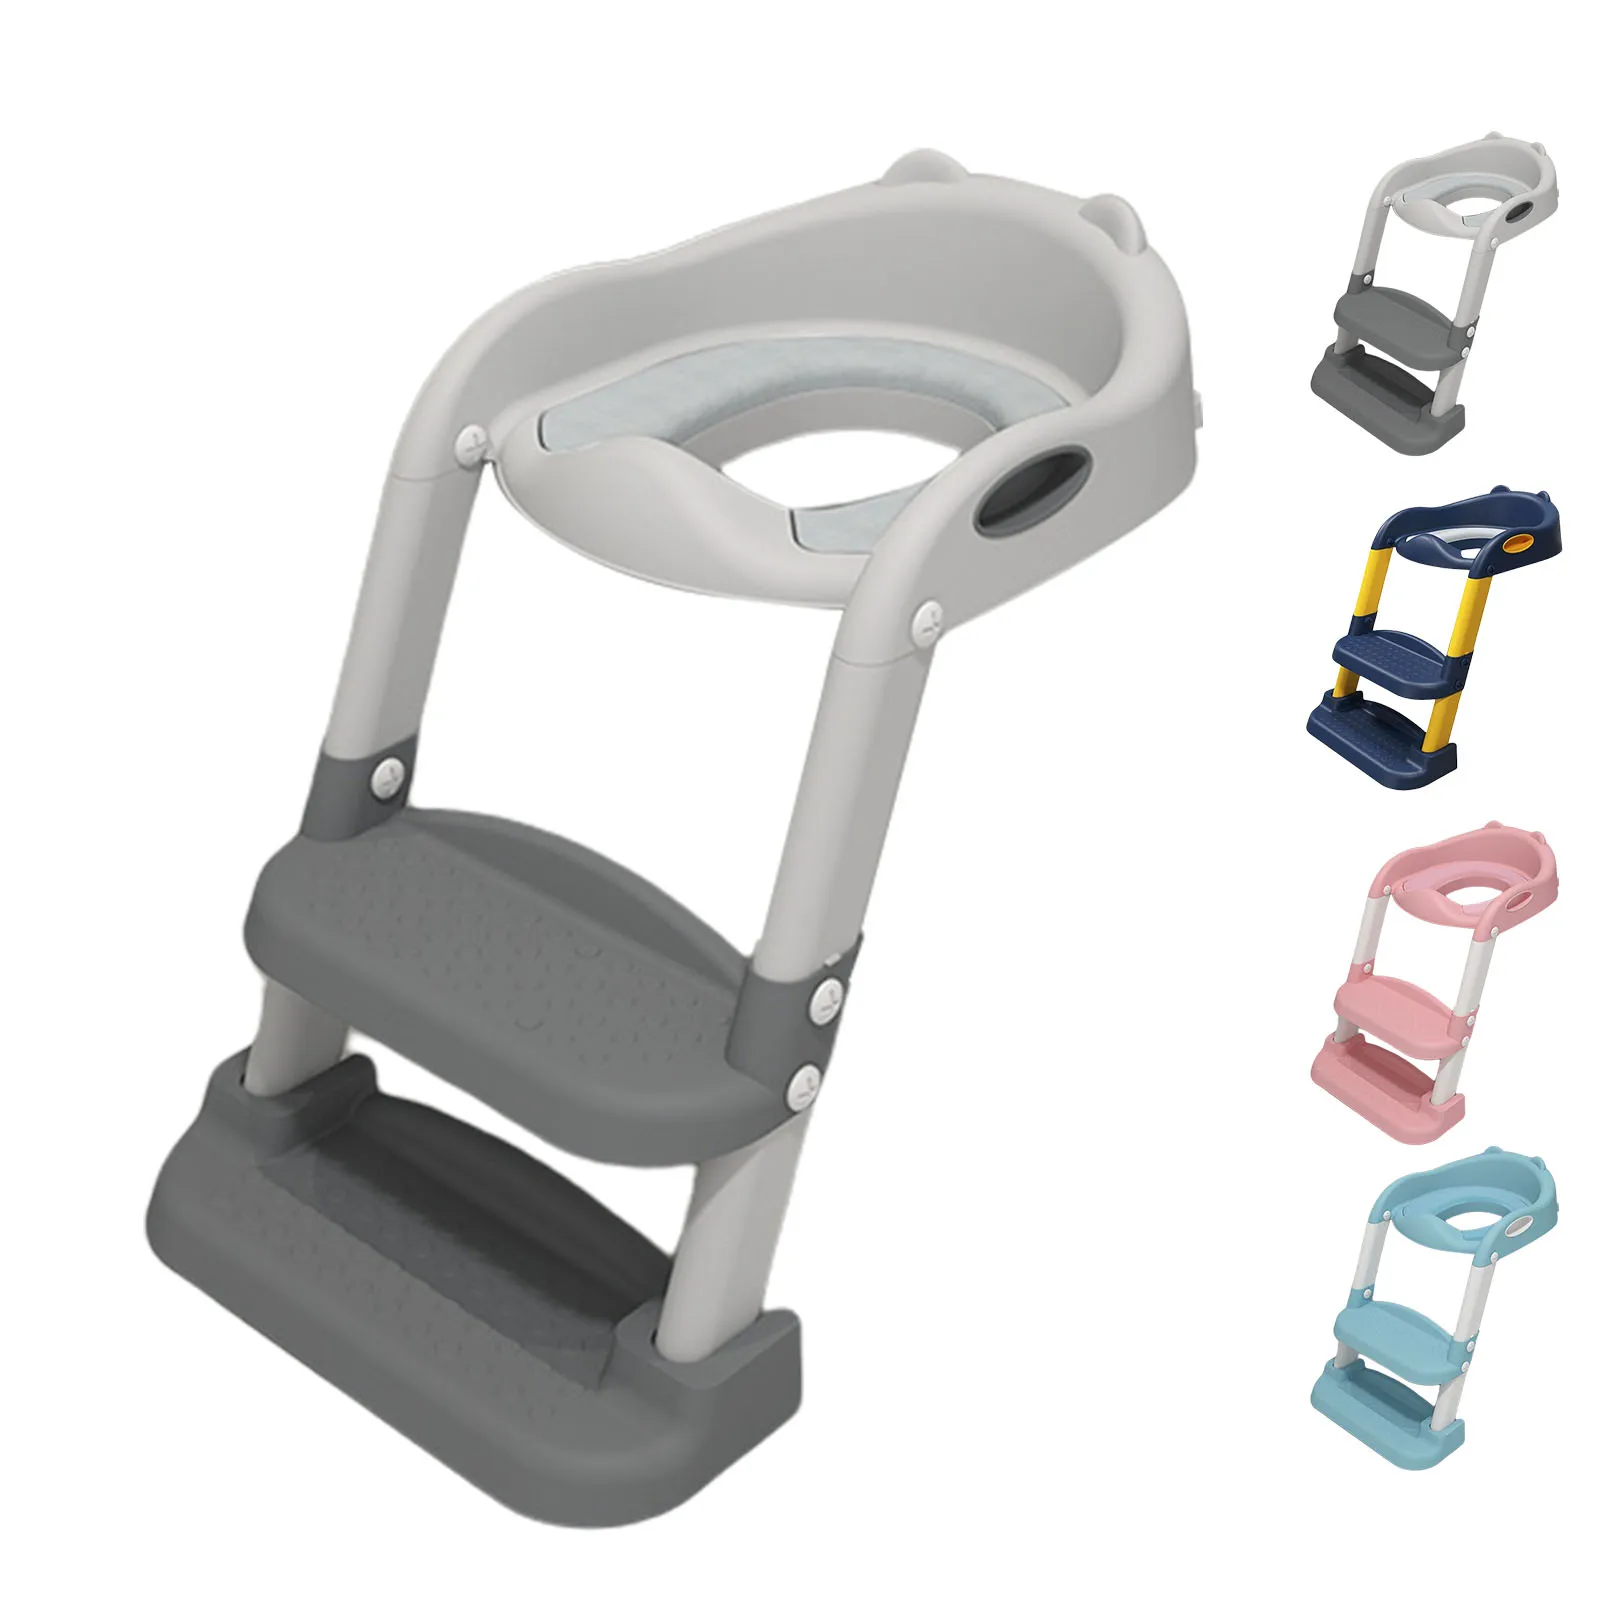 

Portable Folding Toilet Seat Potty Chair Child Non-Slip Potty Training Seat With Adjustable Step Stools Ladder Urinal Astounding